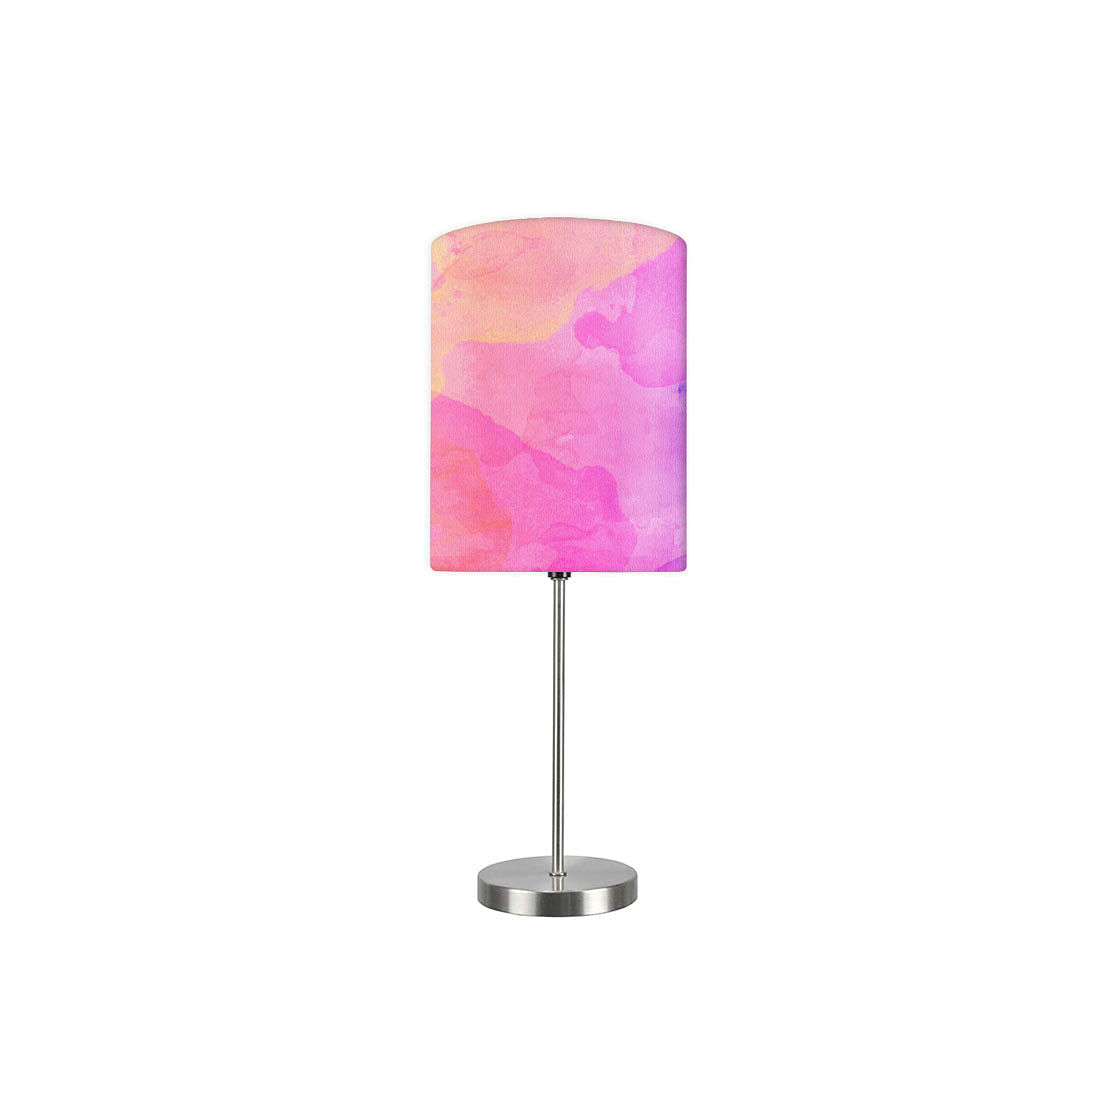 Light Pink Lamps for Children Study Room - Watercolor 0021 Nutcase